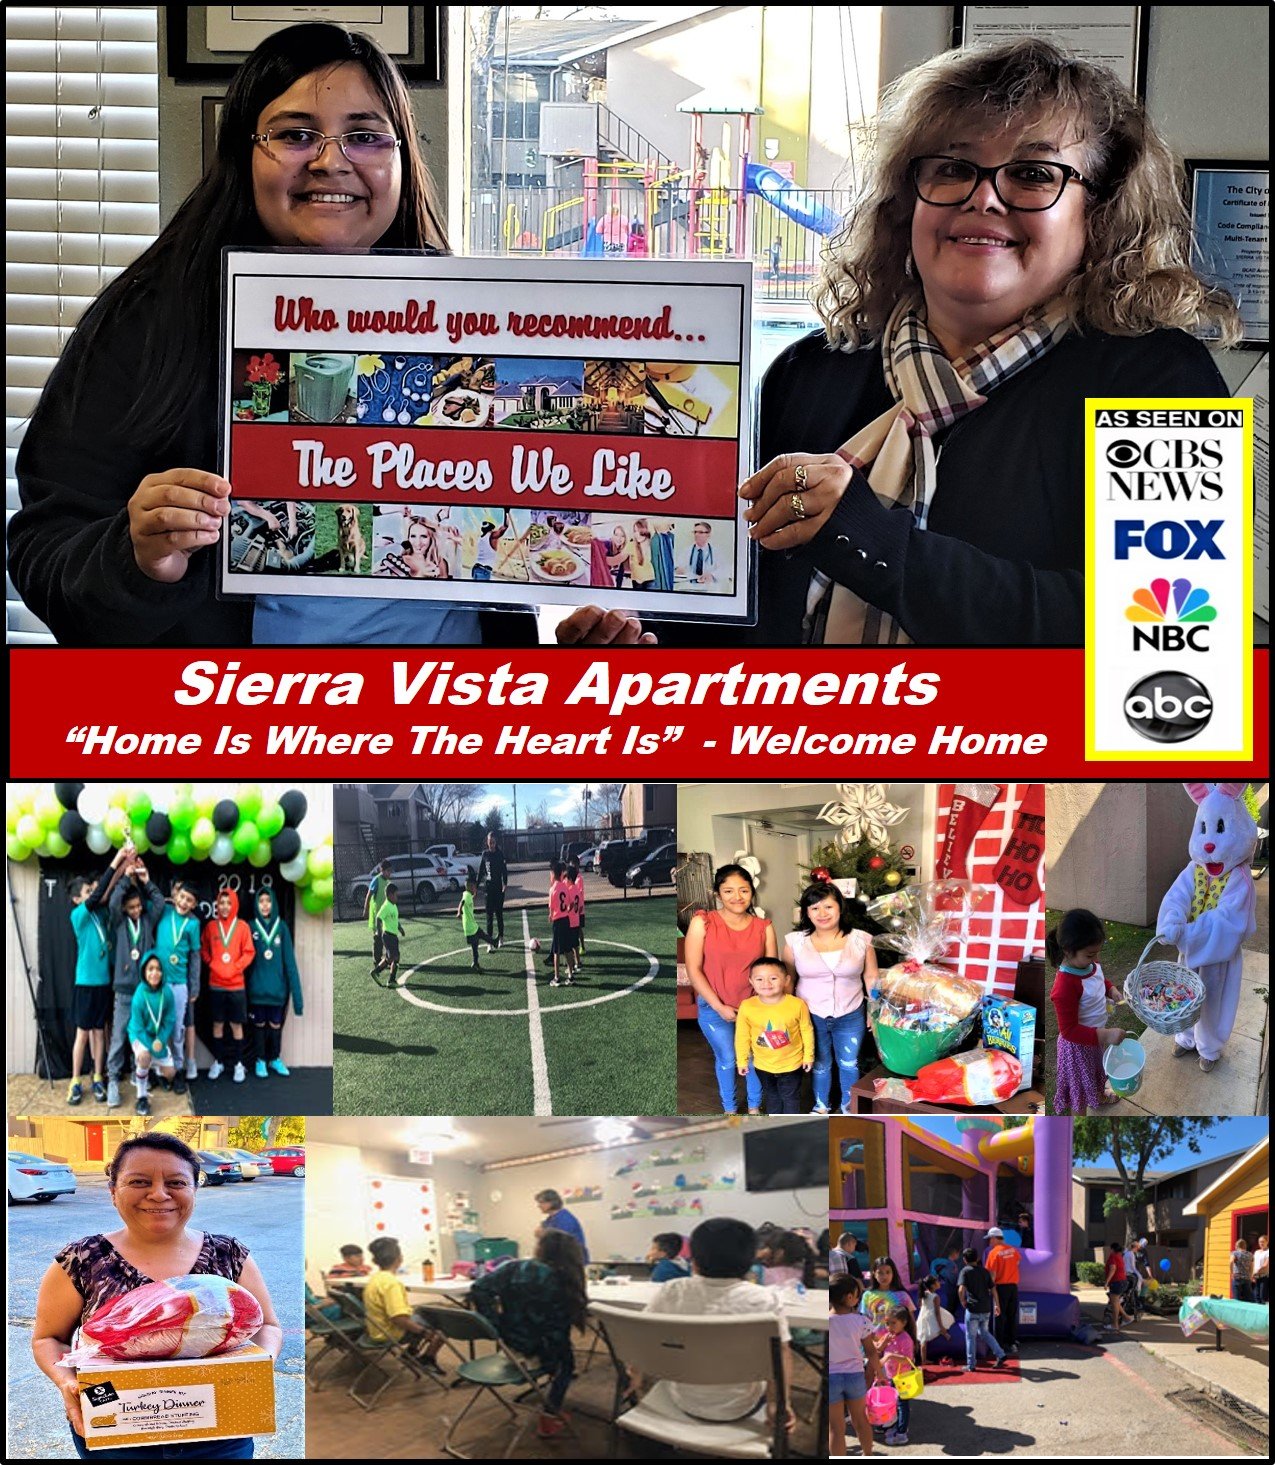 Sierra Vista Apartments In Dallas Texas Was Just Recognized By “The Places We Like In Dallas” As A Premier Living Community Whose #1 Priority Is The Family